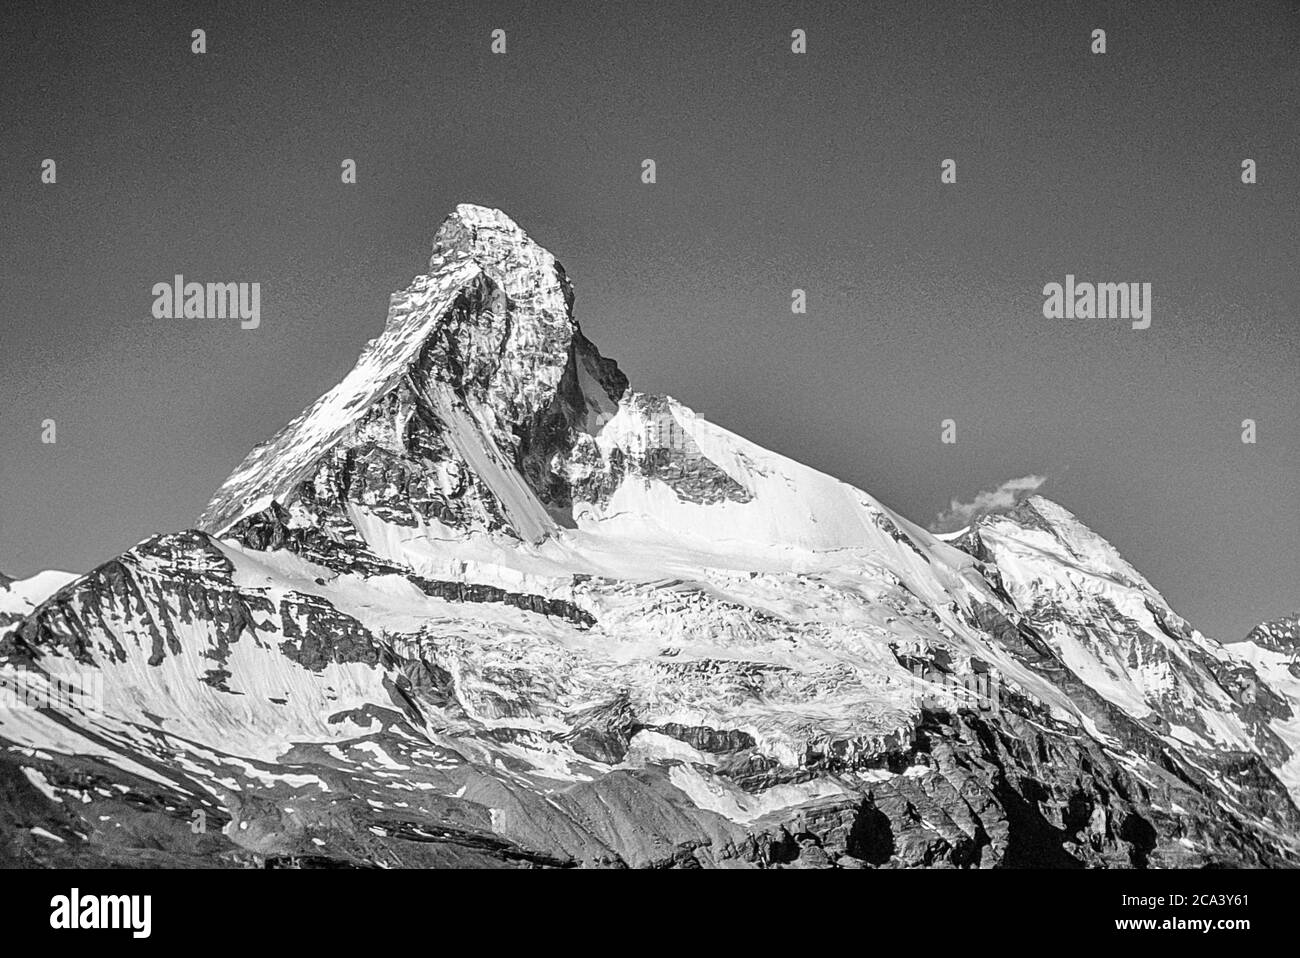 Switzerland. Zermatt. This is the famous Matterhorn mountain with the prominent Hoernli Ridge, to the near left, the route followed during the first and tragic ascent on 15 July 1865. The skyline ridge to the right is the Zmuttgrat. The mountain on the far right is the Dent d'Herens. The iconic Matterhorn is the heart and soul of the Swiss mountain holiday resort town of Zermatt in the Swiss Canton of Valais Stock Photo